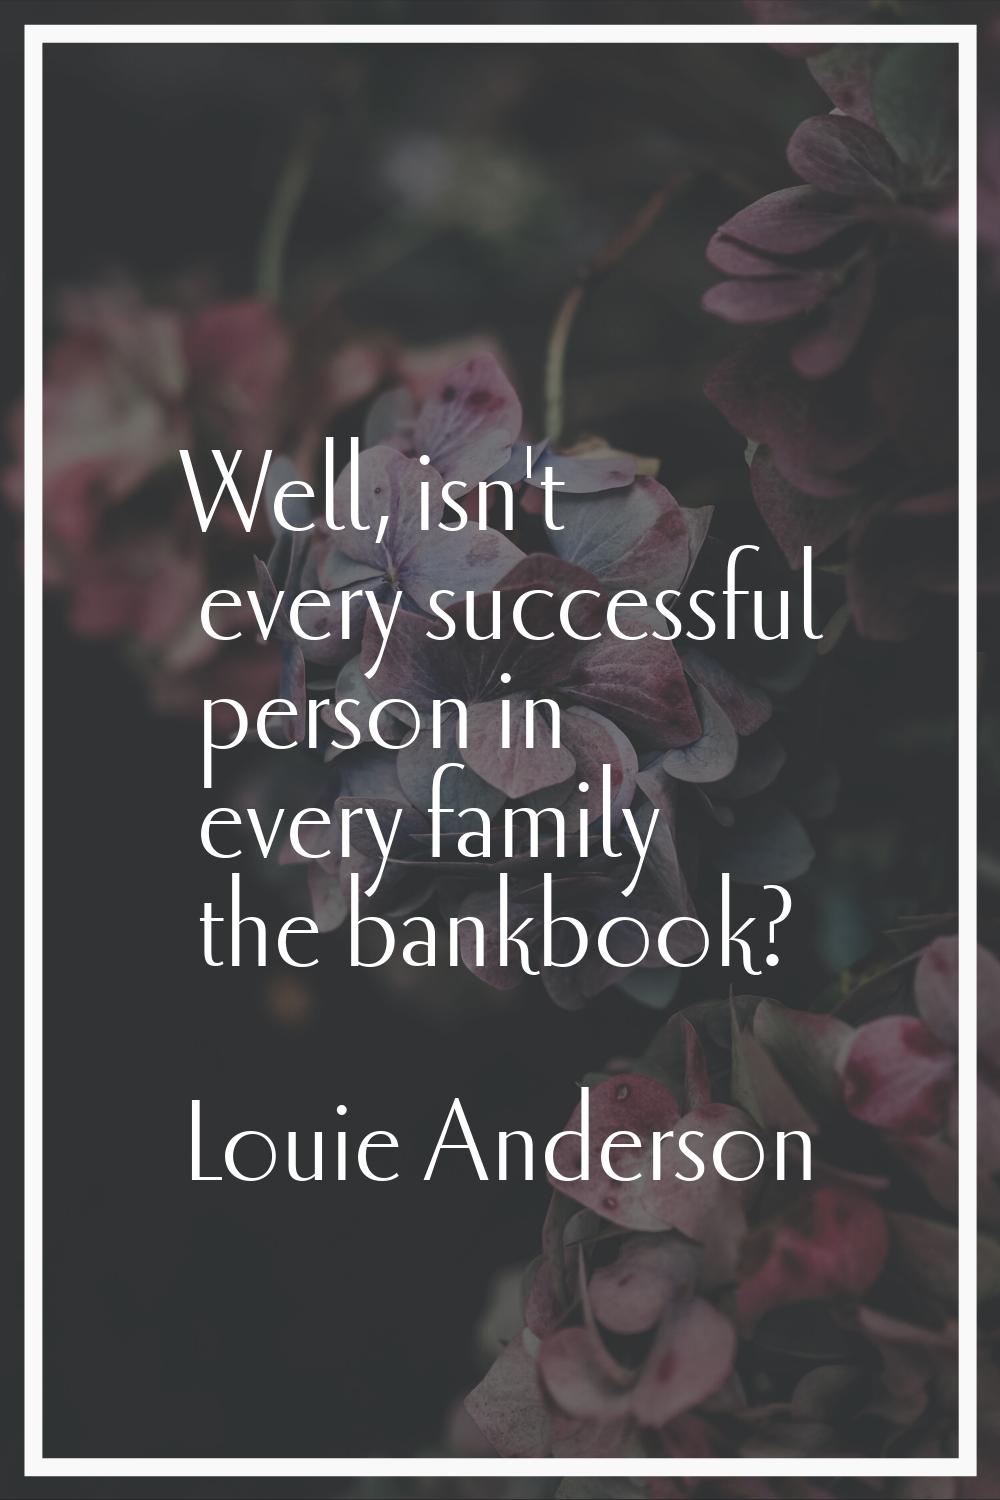 Well, isn't every successful person in every family the bankbook?